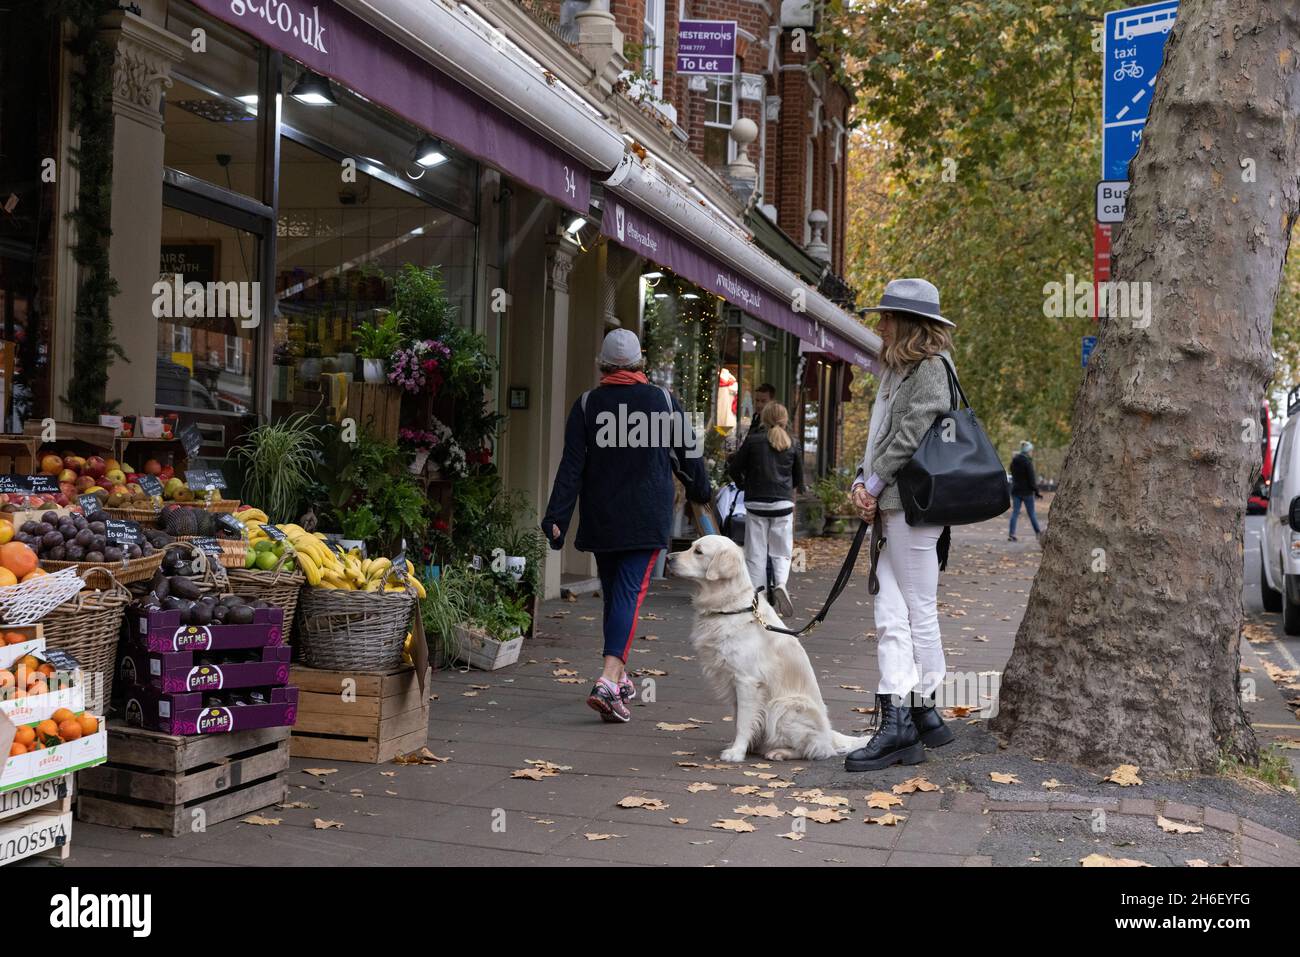 A well-dressed lady and her dog wait outside Bayley & Sage delicatessens, New Kings Road, Parsons Green, Southwest London, England, United Kingdom Stock Photo